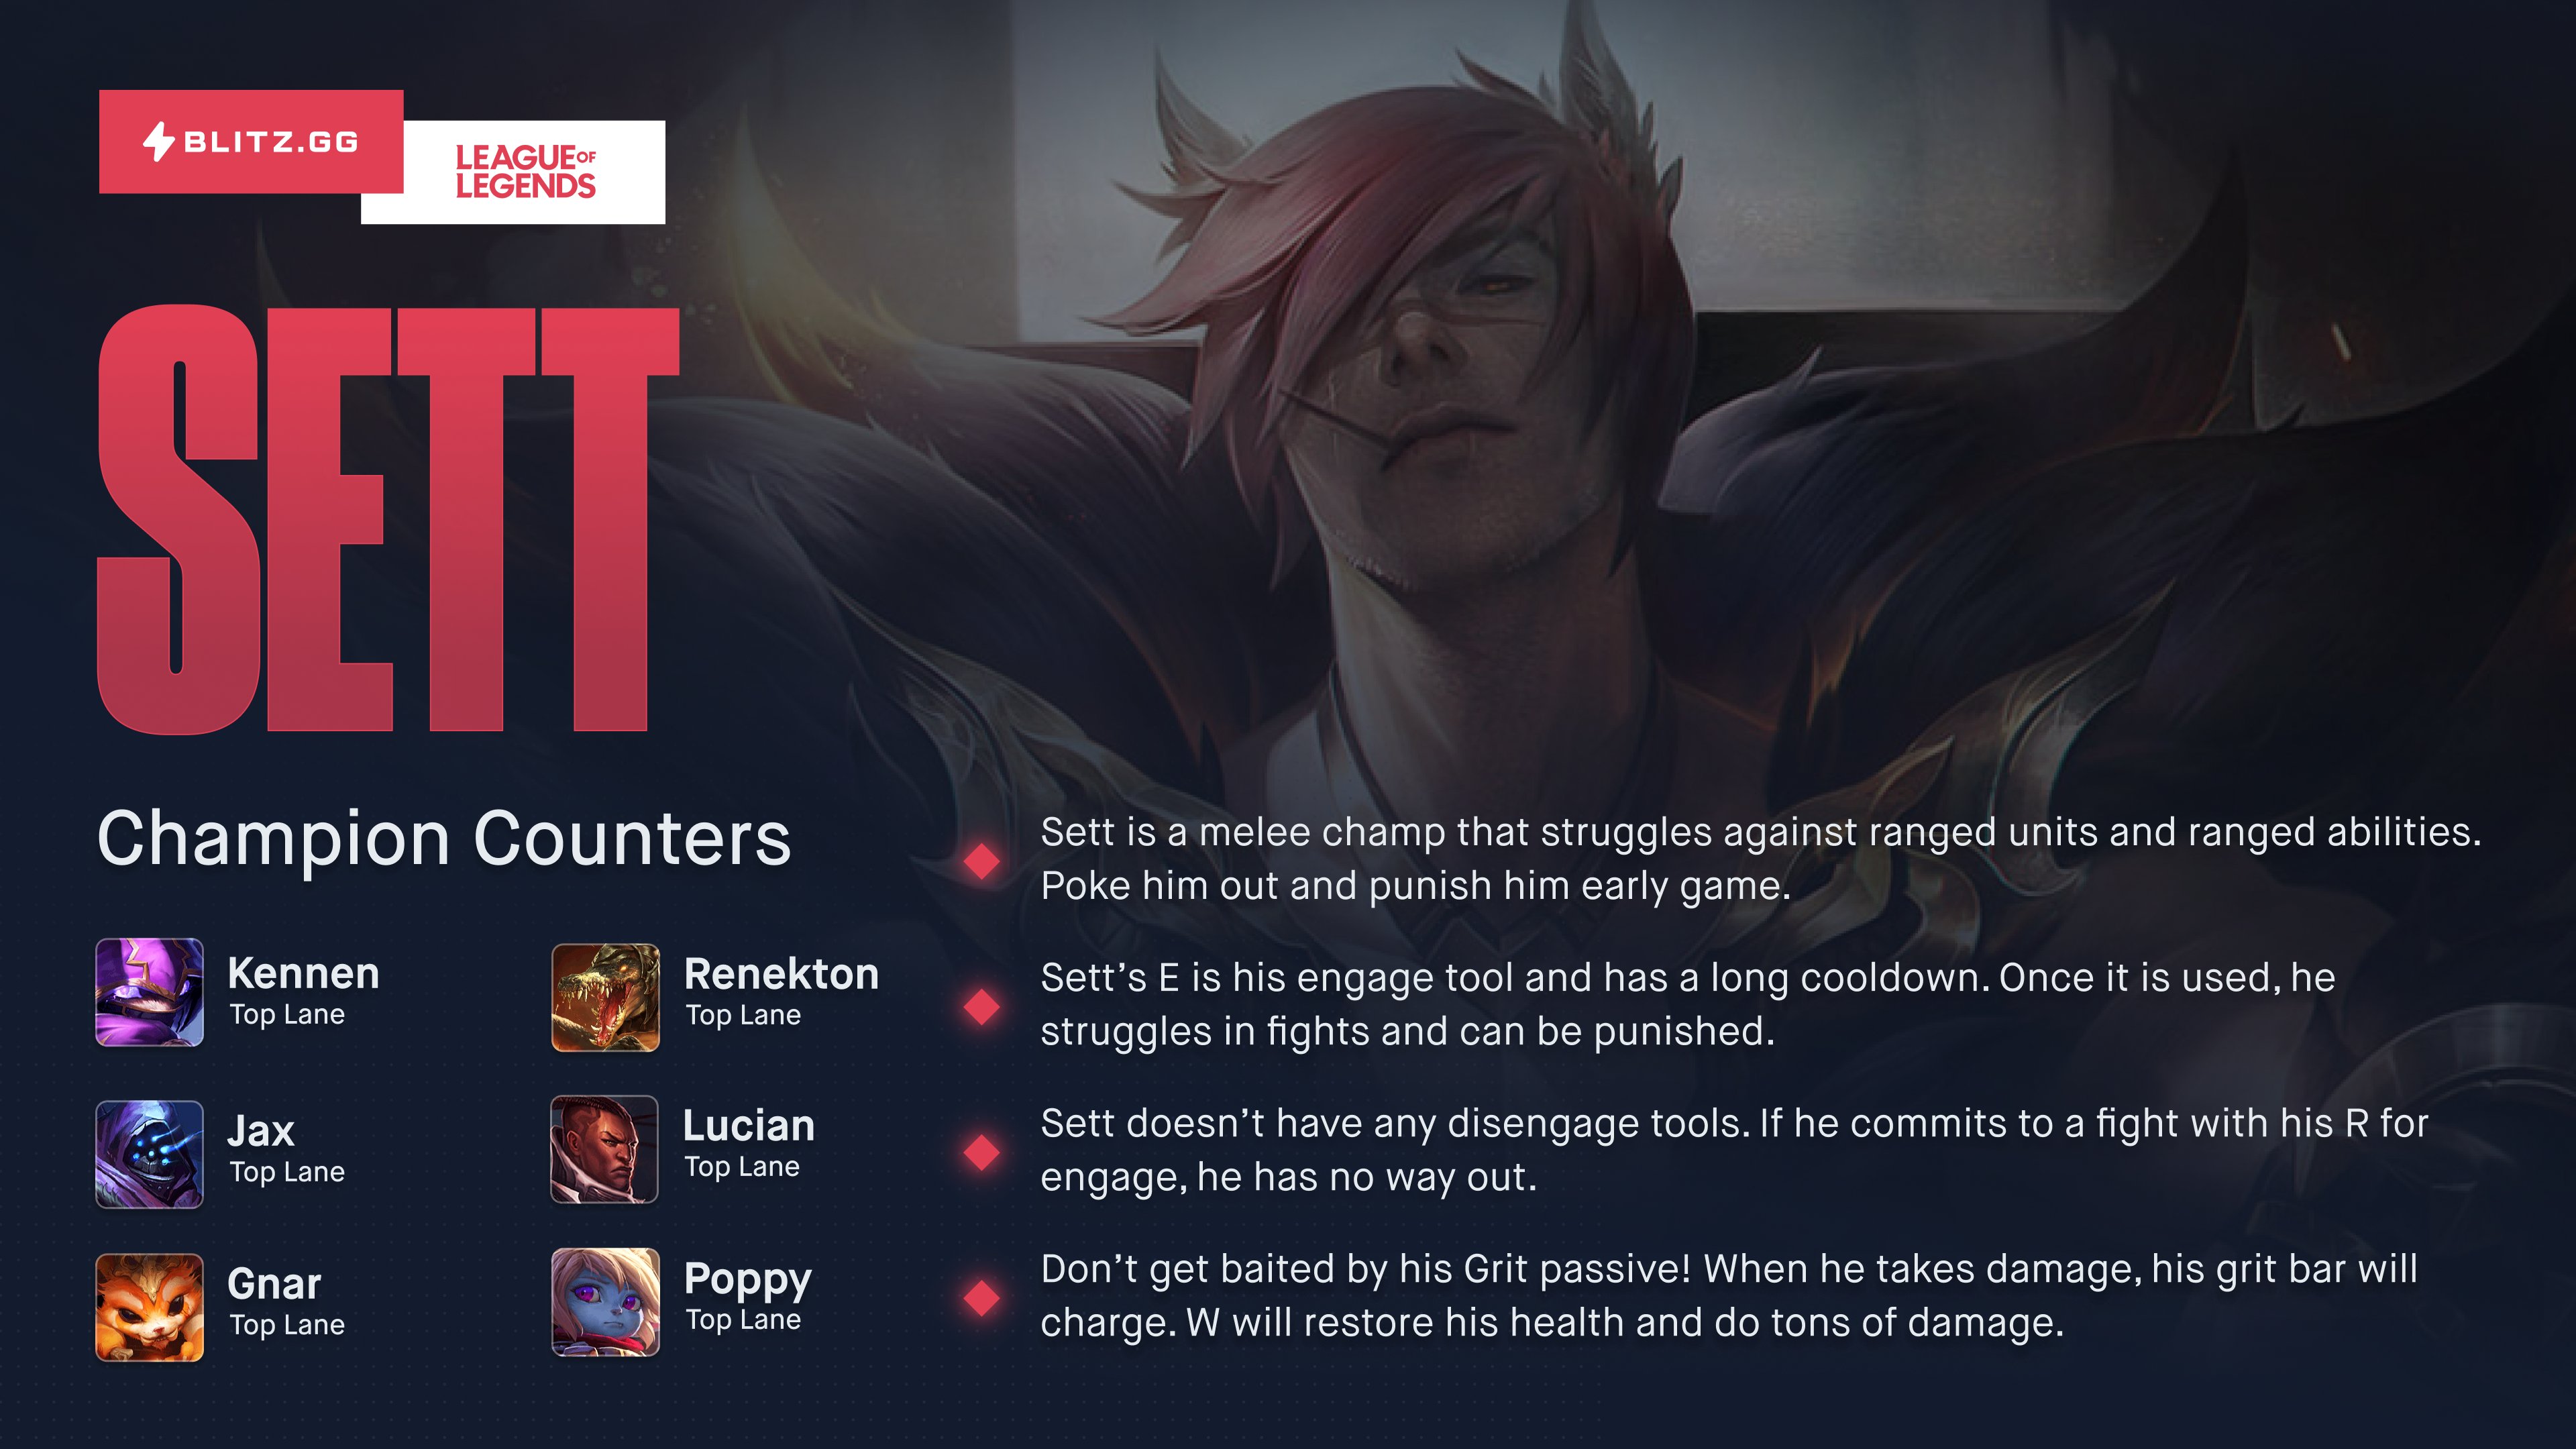 Blitz App Twitter: "Sett excels at melee matchups and skirmishes so champions with ranged attacks and abilities can punish him early on. Keep your distance watch his cooldowns! /